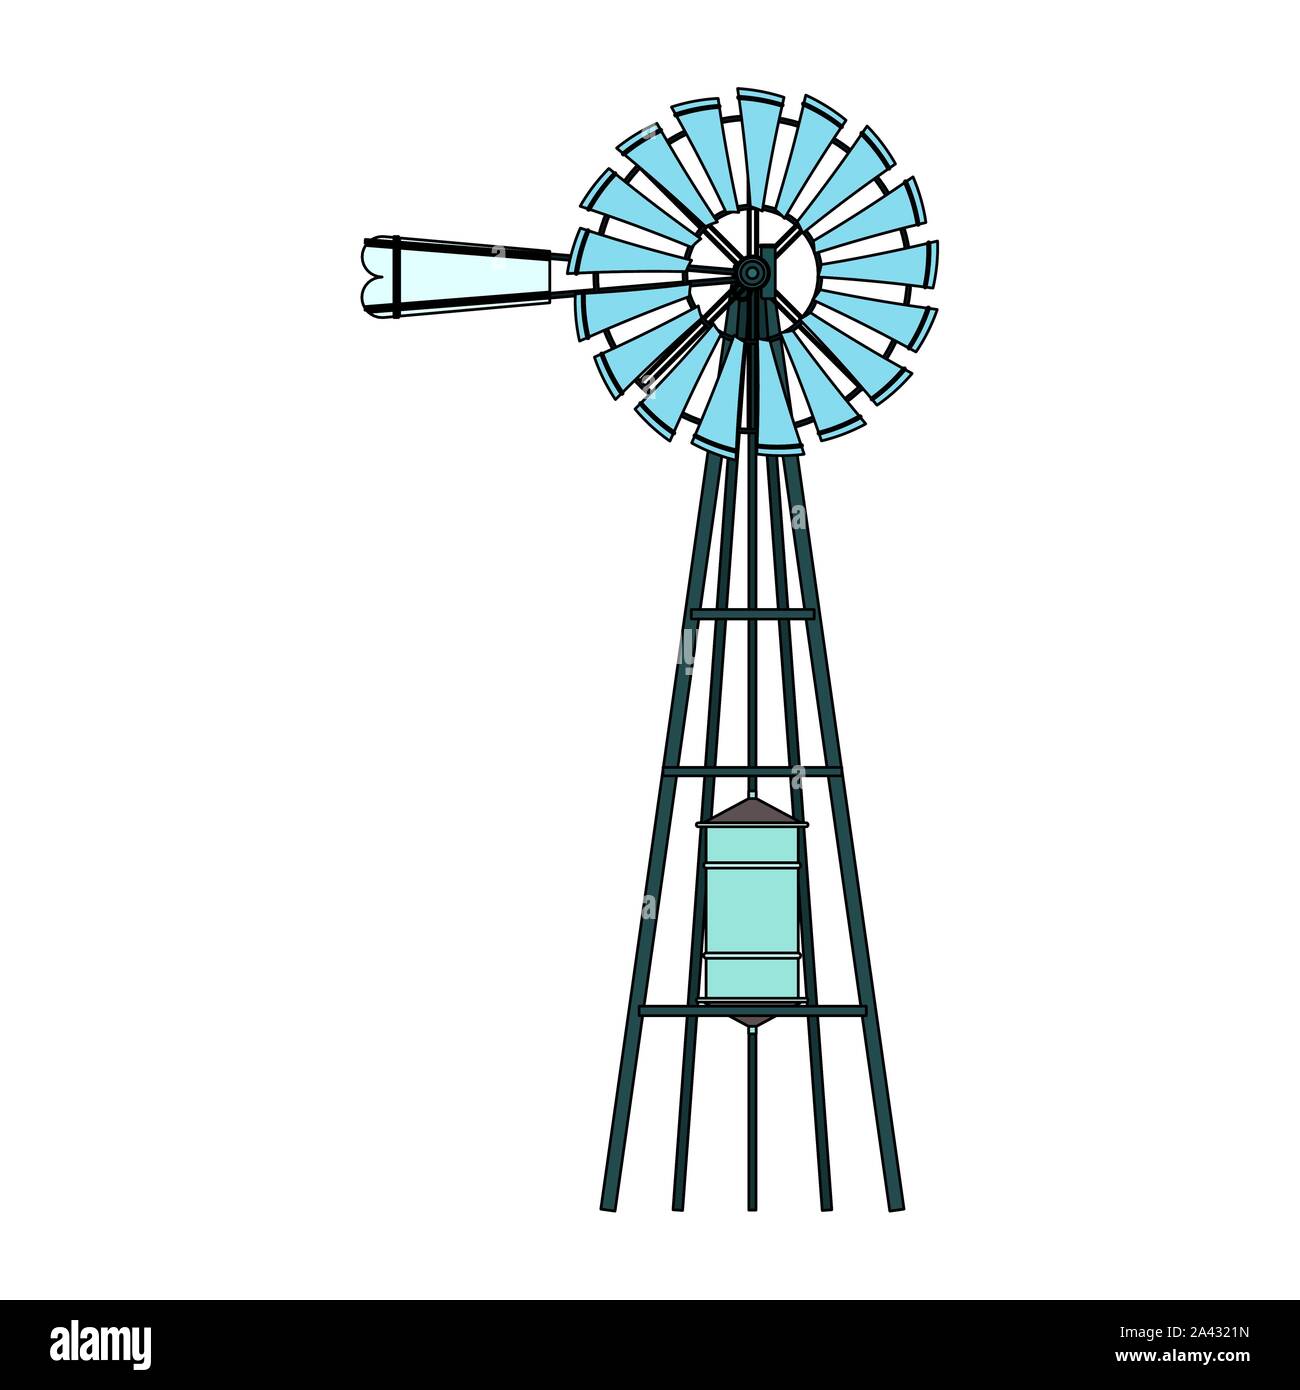 Old Water Pump Drawing by Laneea Tolley  Pixels